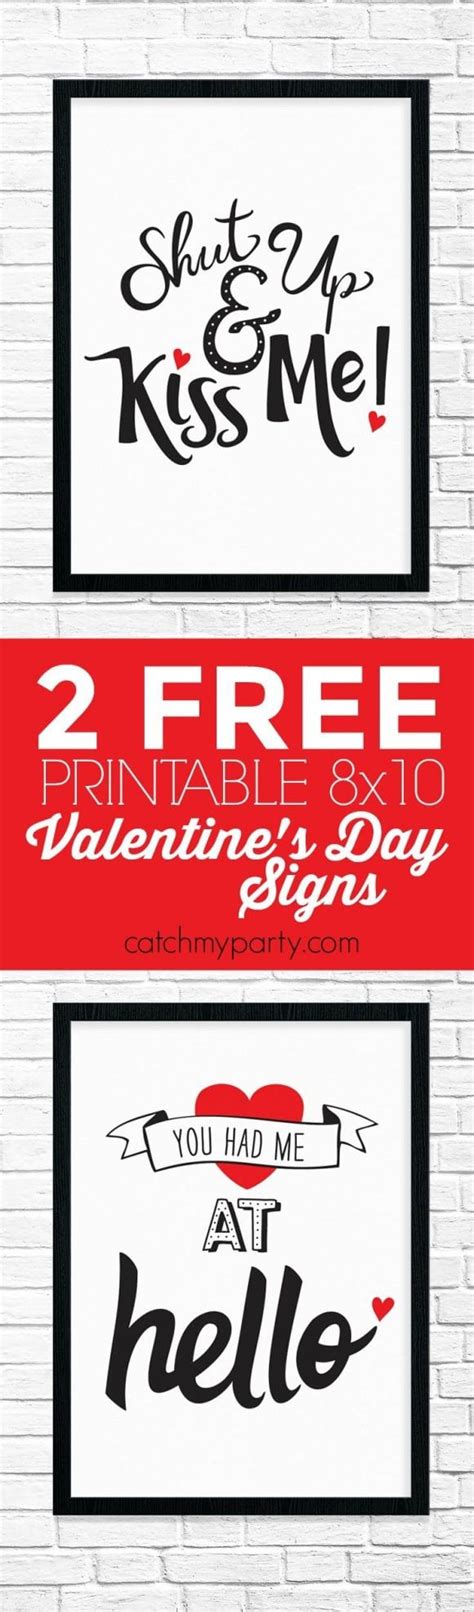 Free Printable Romantic Valentines Day Signs Catch My Party